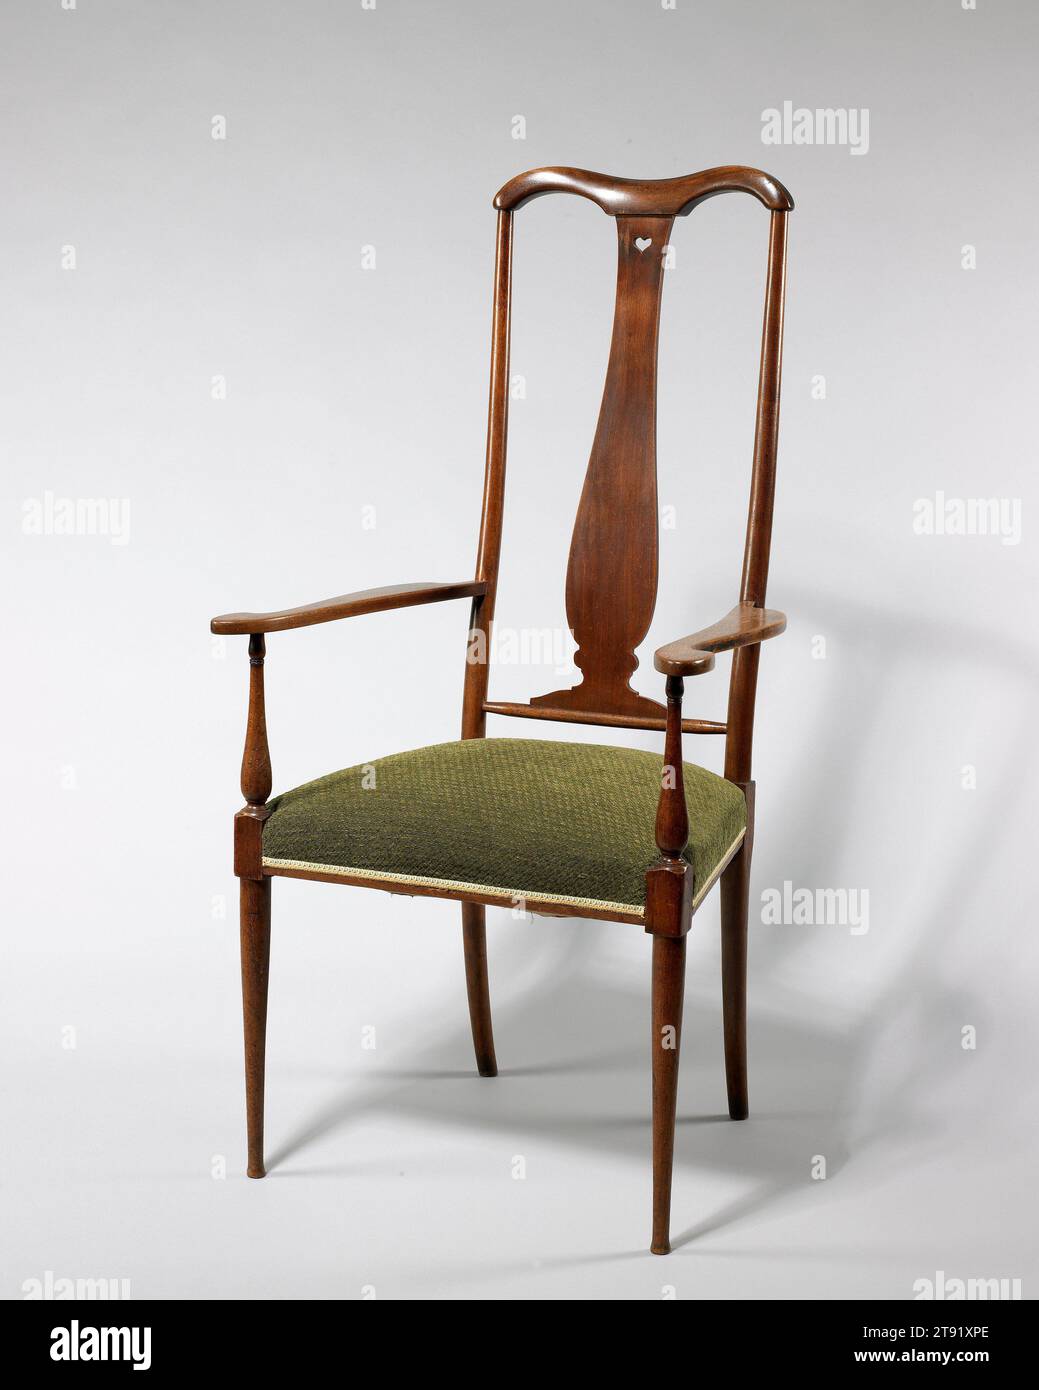 Brussels' armchair, c. 1901, George Walton, Scottish, 1867-1933, 48 x 24 x 20 in. (121.92 x 60.96 x 50.8 cm), Walnut, upholstery, England, 19th-20th century, Architect and interior designer George Walton studied at the Glasgow School of Art before establishing a design firm in Glasgow in 1888. He decorated numerous homes and businesses in the Glagow area, including the Argyle Street tea-room and the Buchanan Street tea-rooms with Charles Rennie Mackintosh. Stock Photo